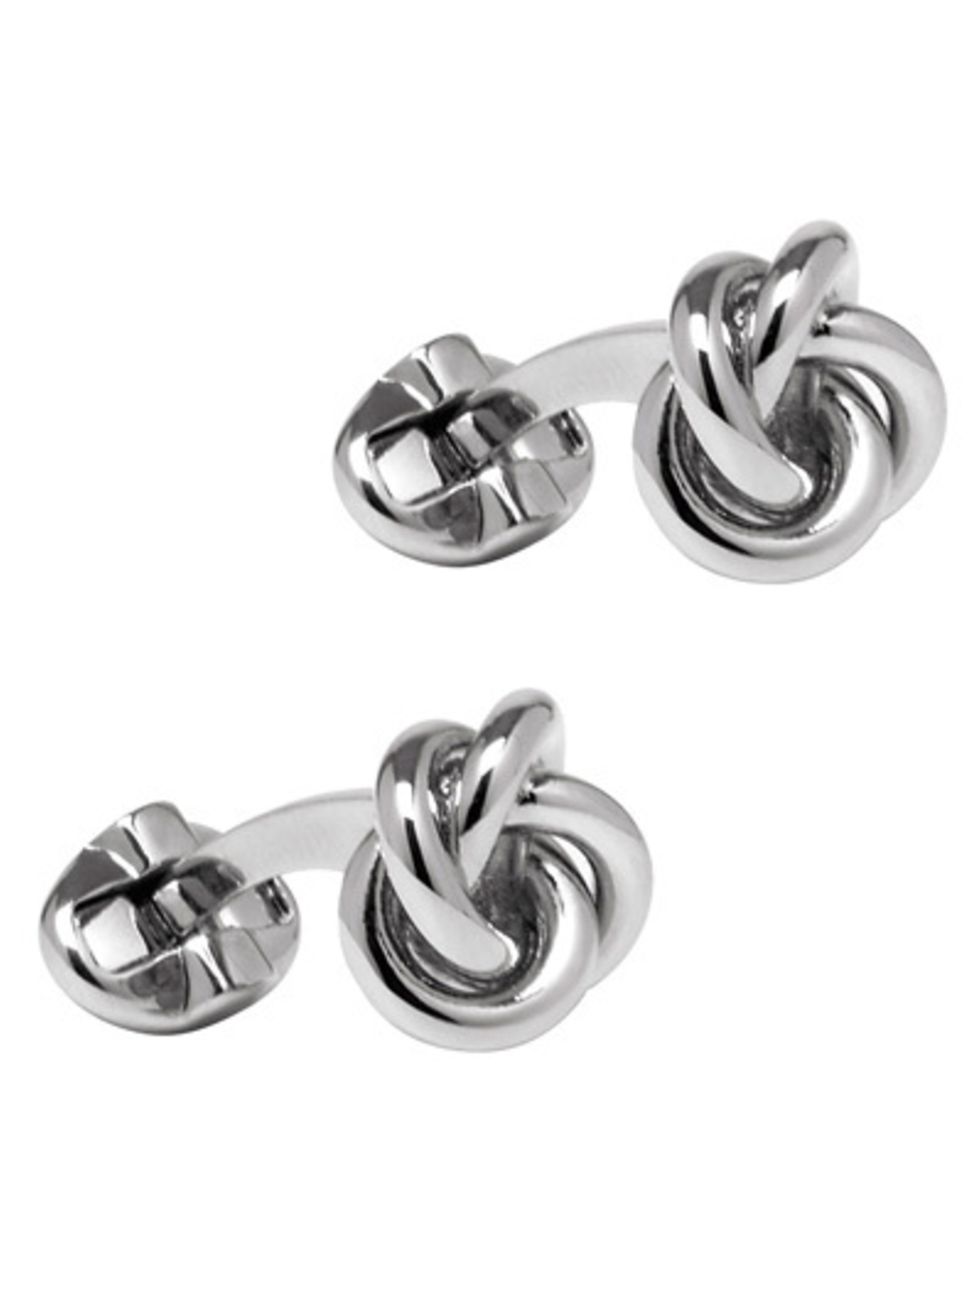 Product, Metal, Body jewelry, Circle, Silver, Earrings, Steel, Aluminium, Household hardware, Silver, 